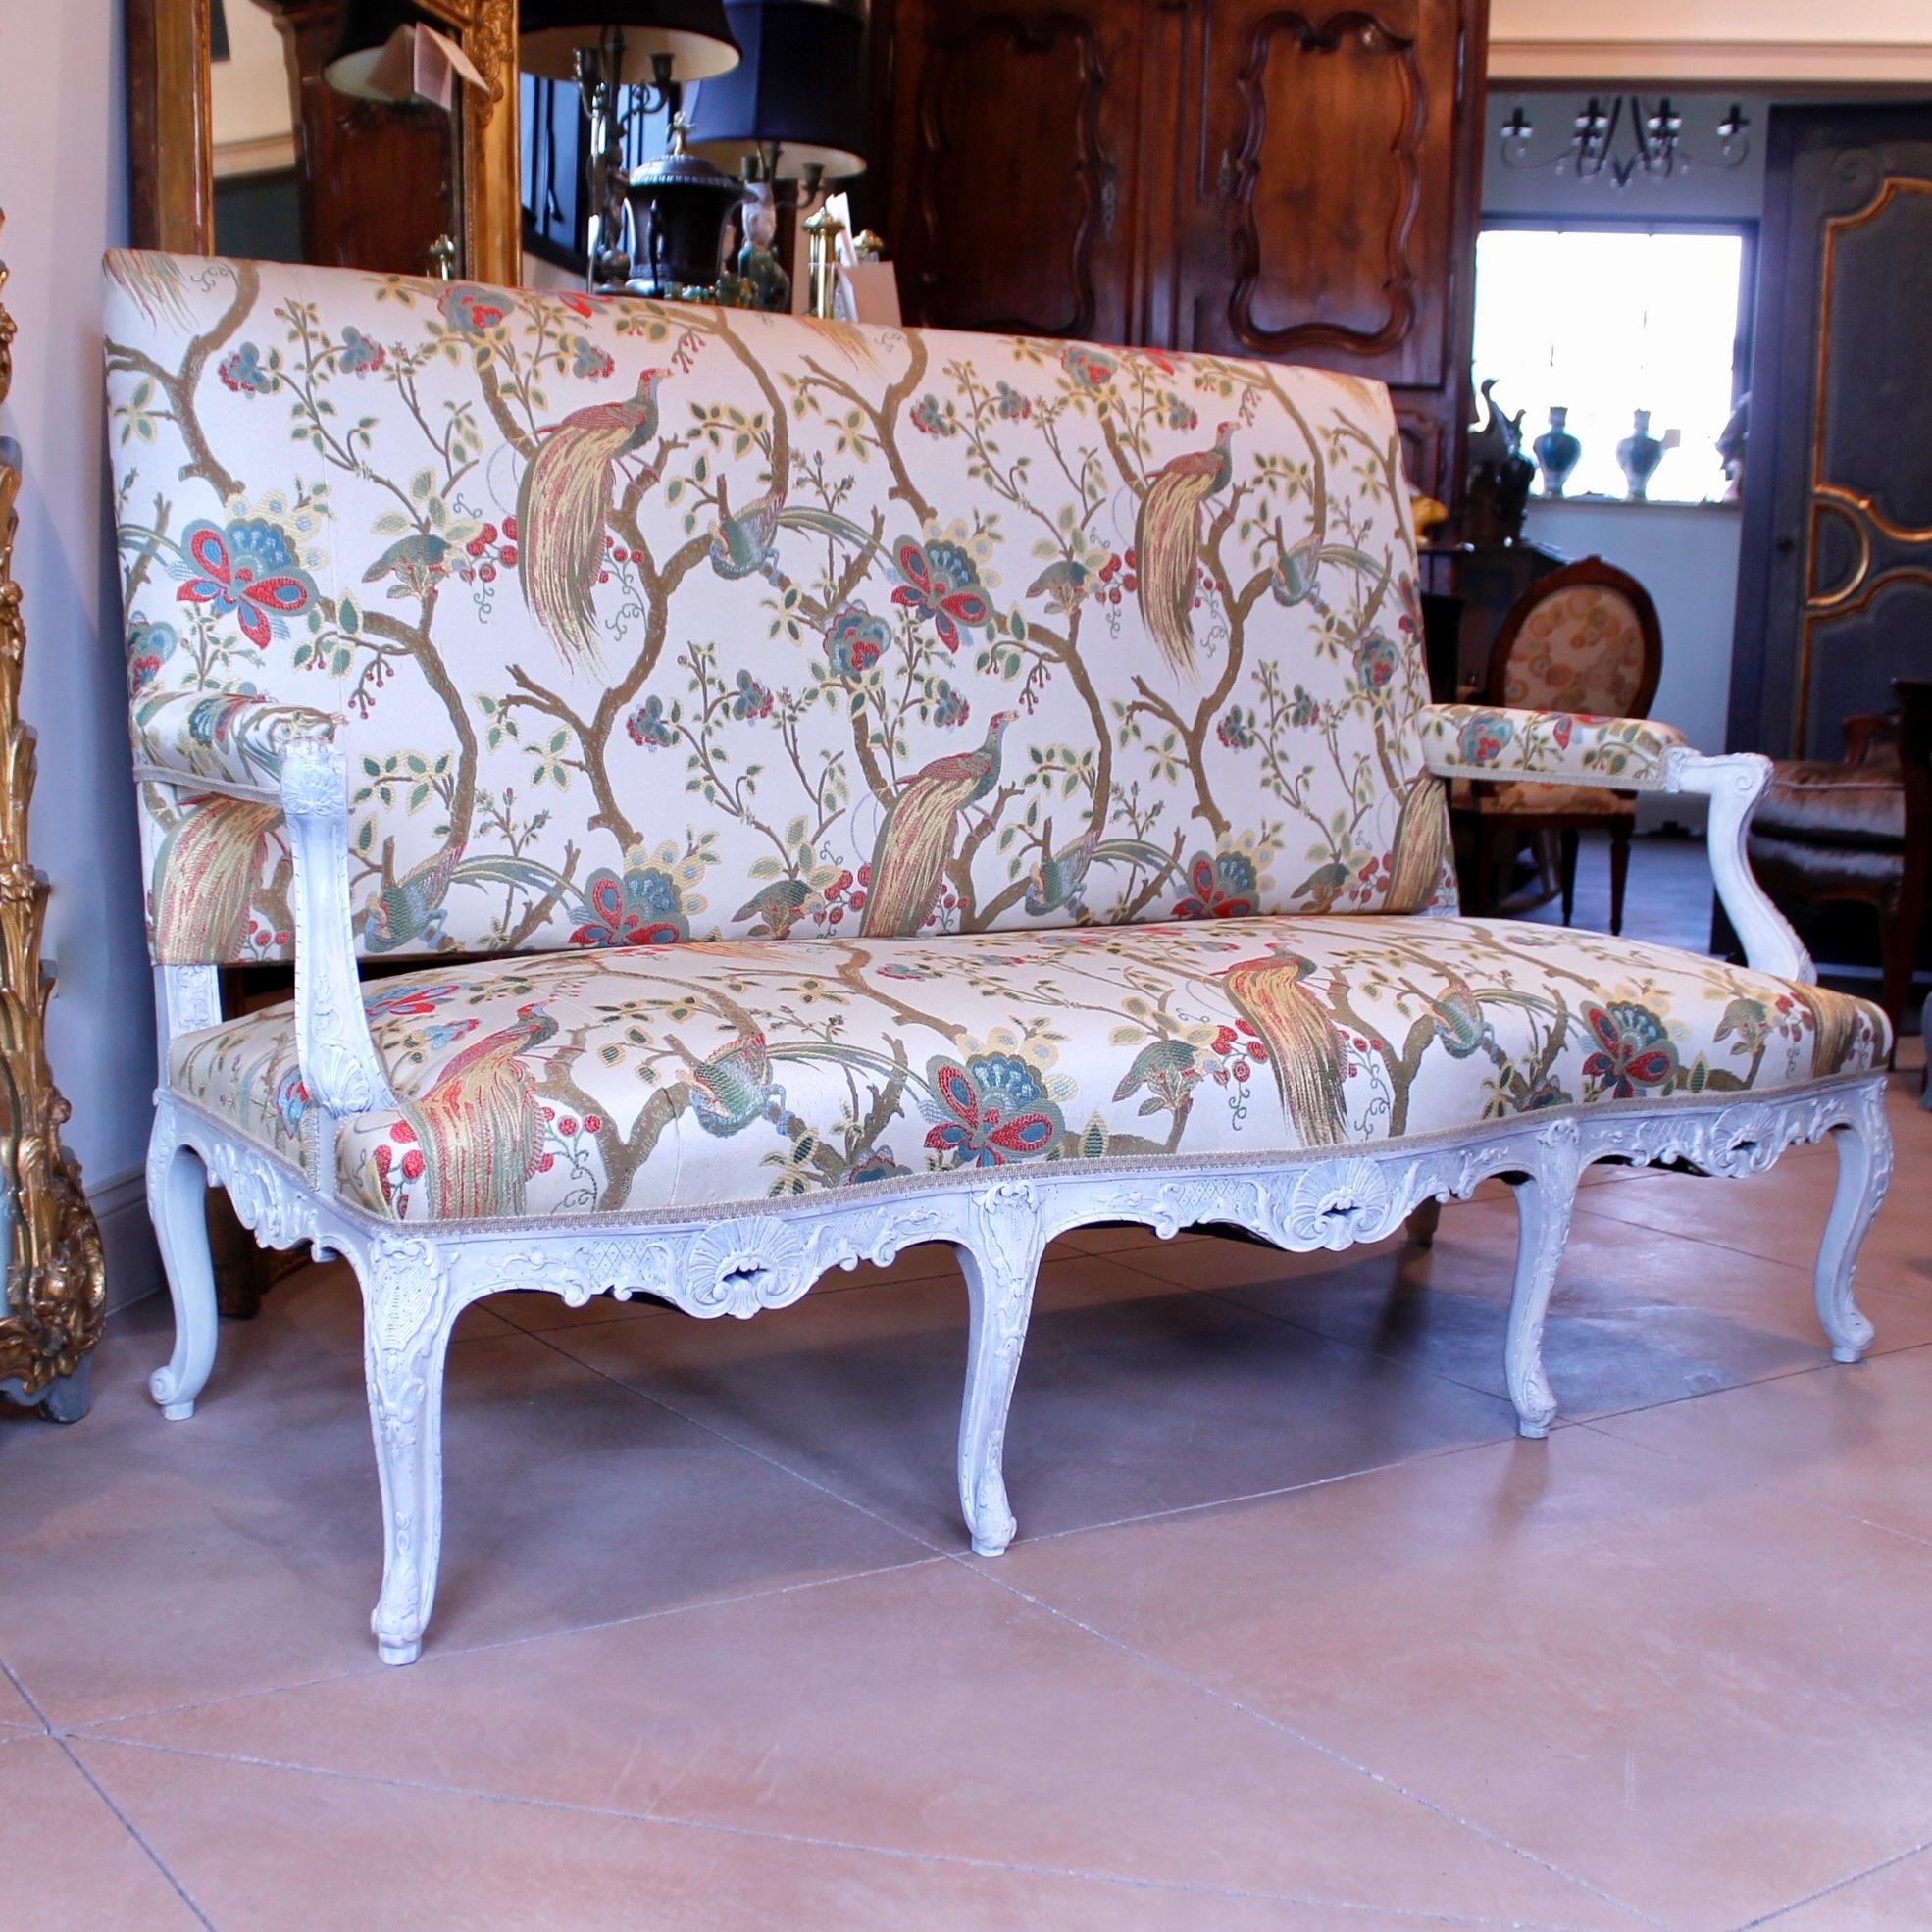 A very finely carved ca. 1890’s Régence style sofa or settee painted cream and freshly upholstered in an 18th century style woven upholstery fabric with branches and pheasants. The carving is crisp and very detailed, and the effect is very elegant.